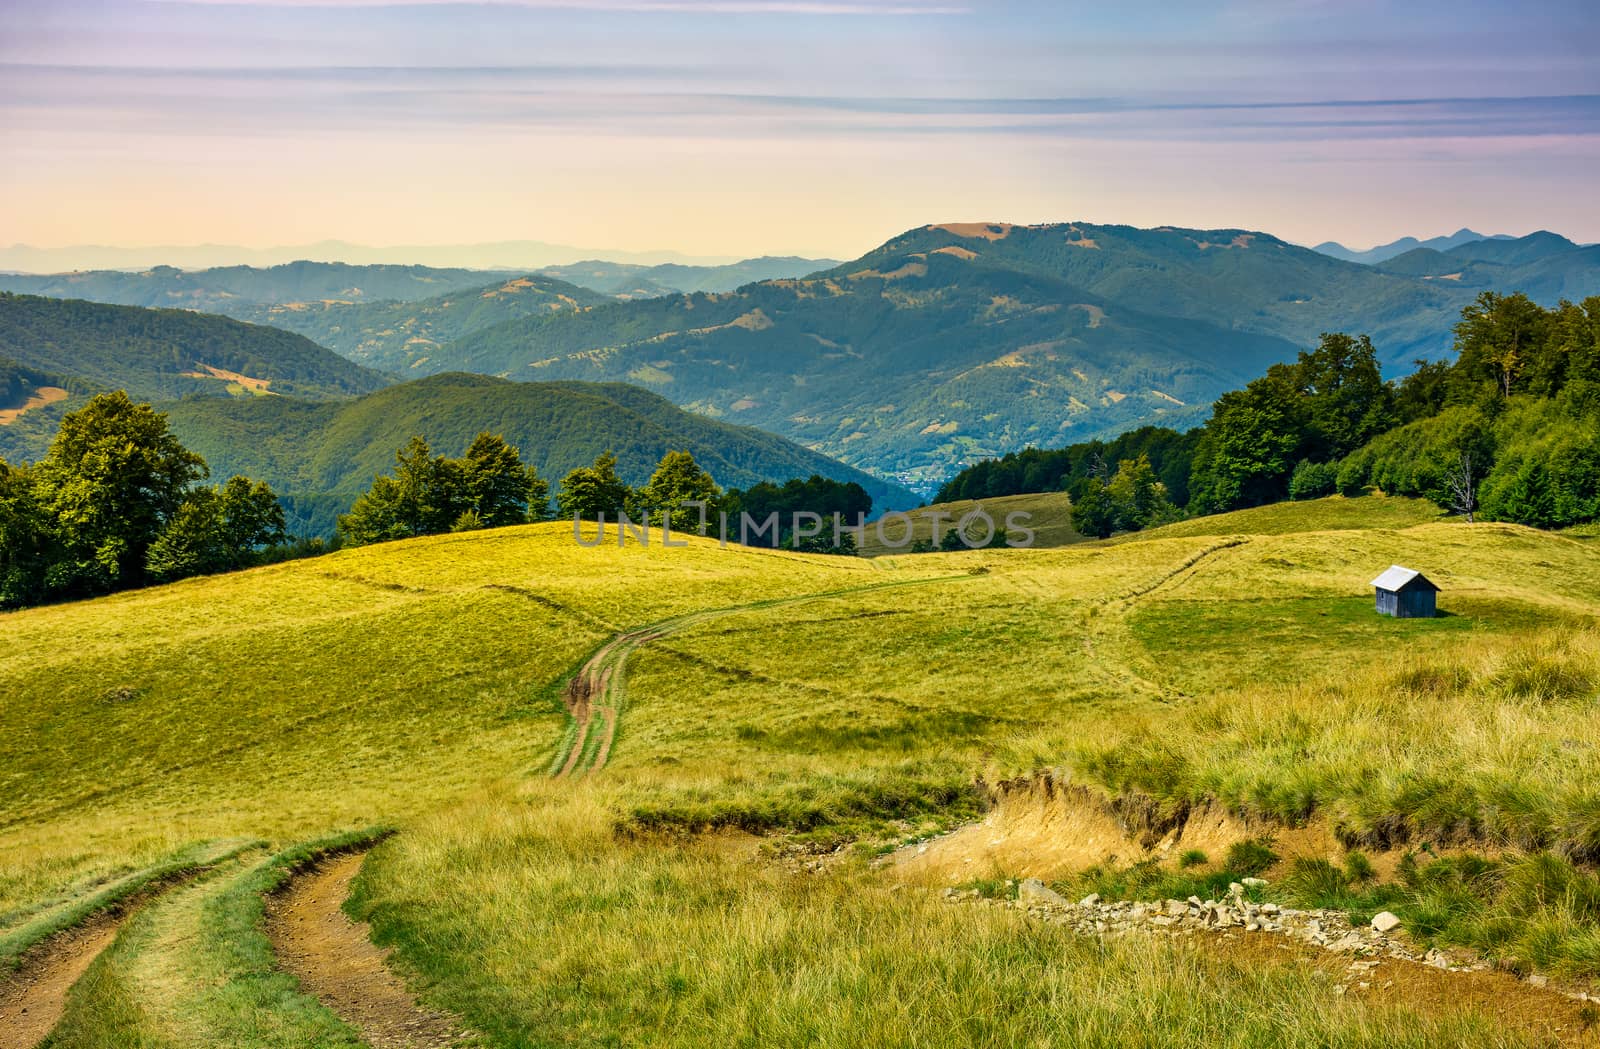 truck path down the grassy hill. wooden shed on the hillside. beautiful landscape with Krasna mountain ridge in the distance in evening light. Carpathian mountains, Ukraine